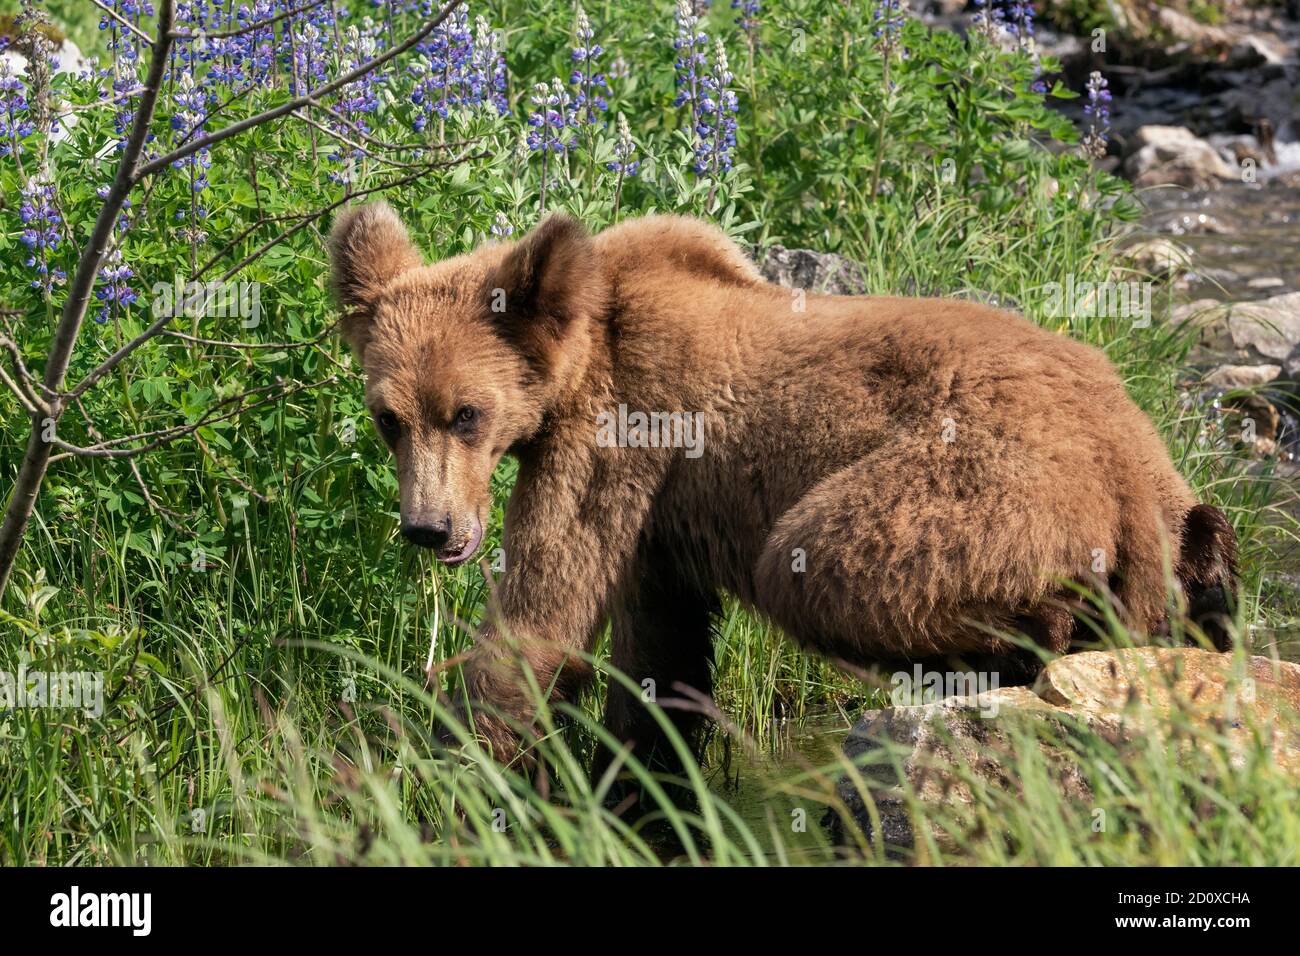 Young grizzly bear foraging by a stream, Khutzeymateen, BC Stock Photo